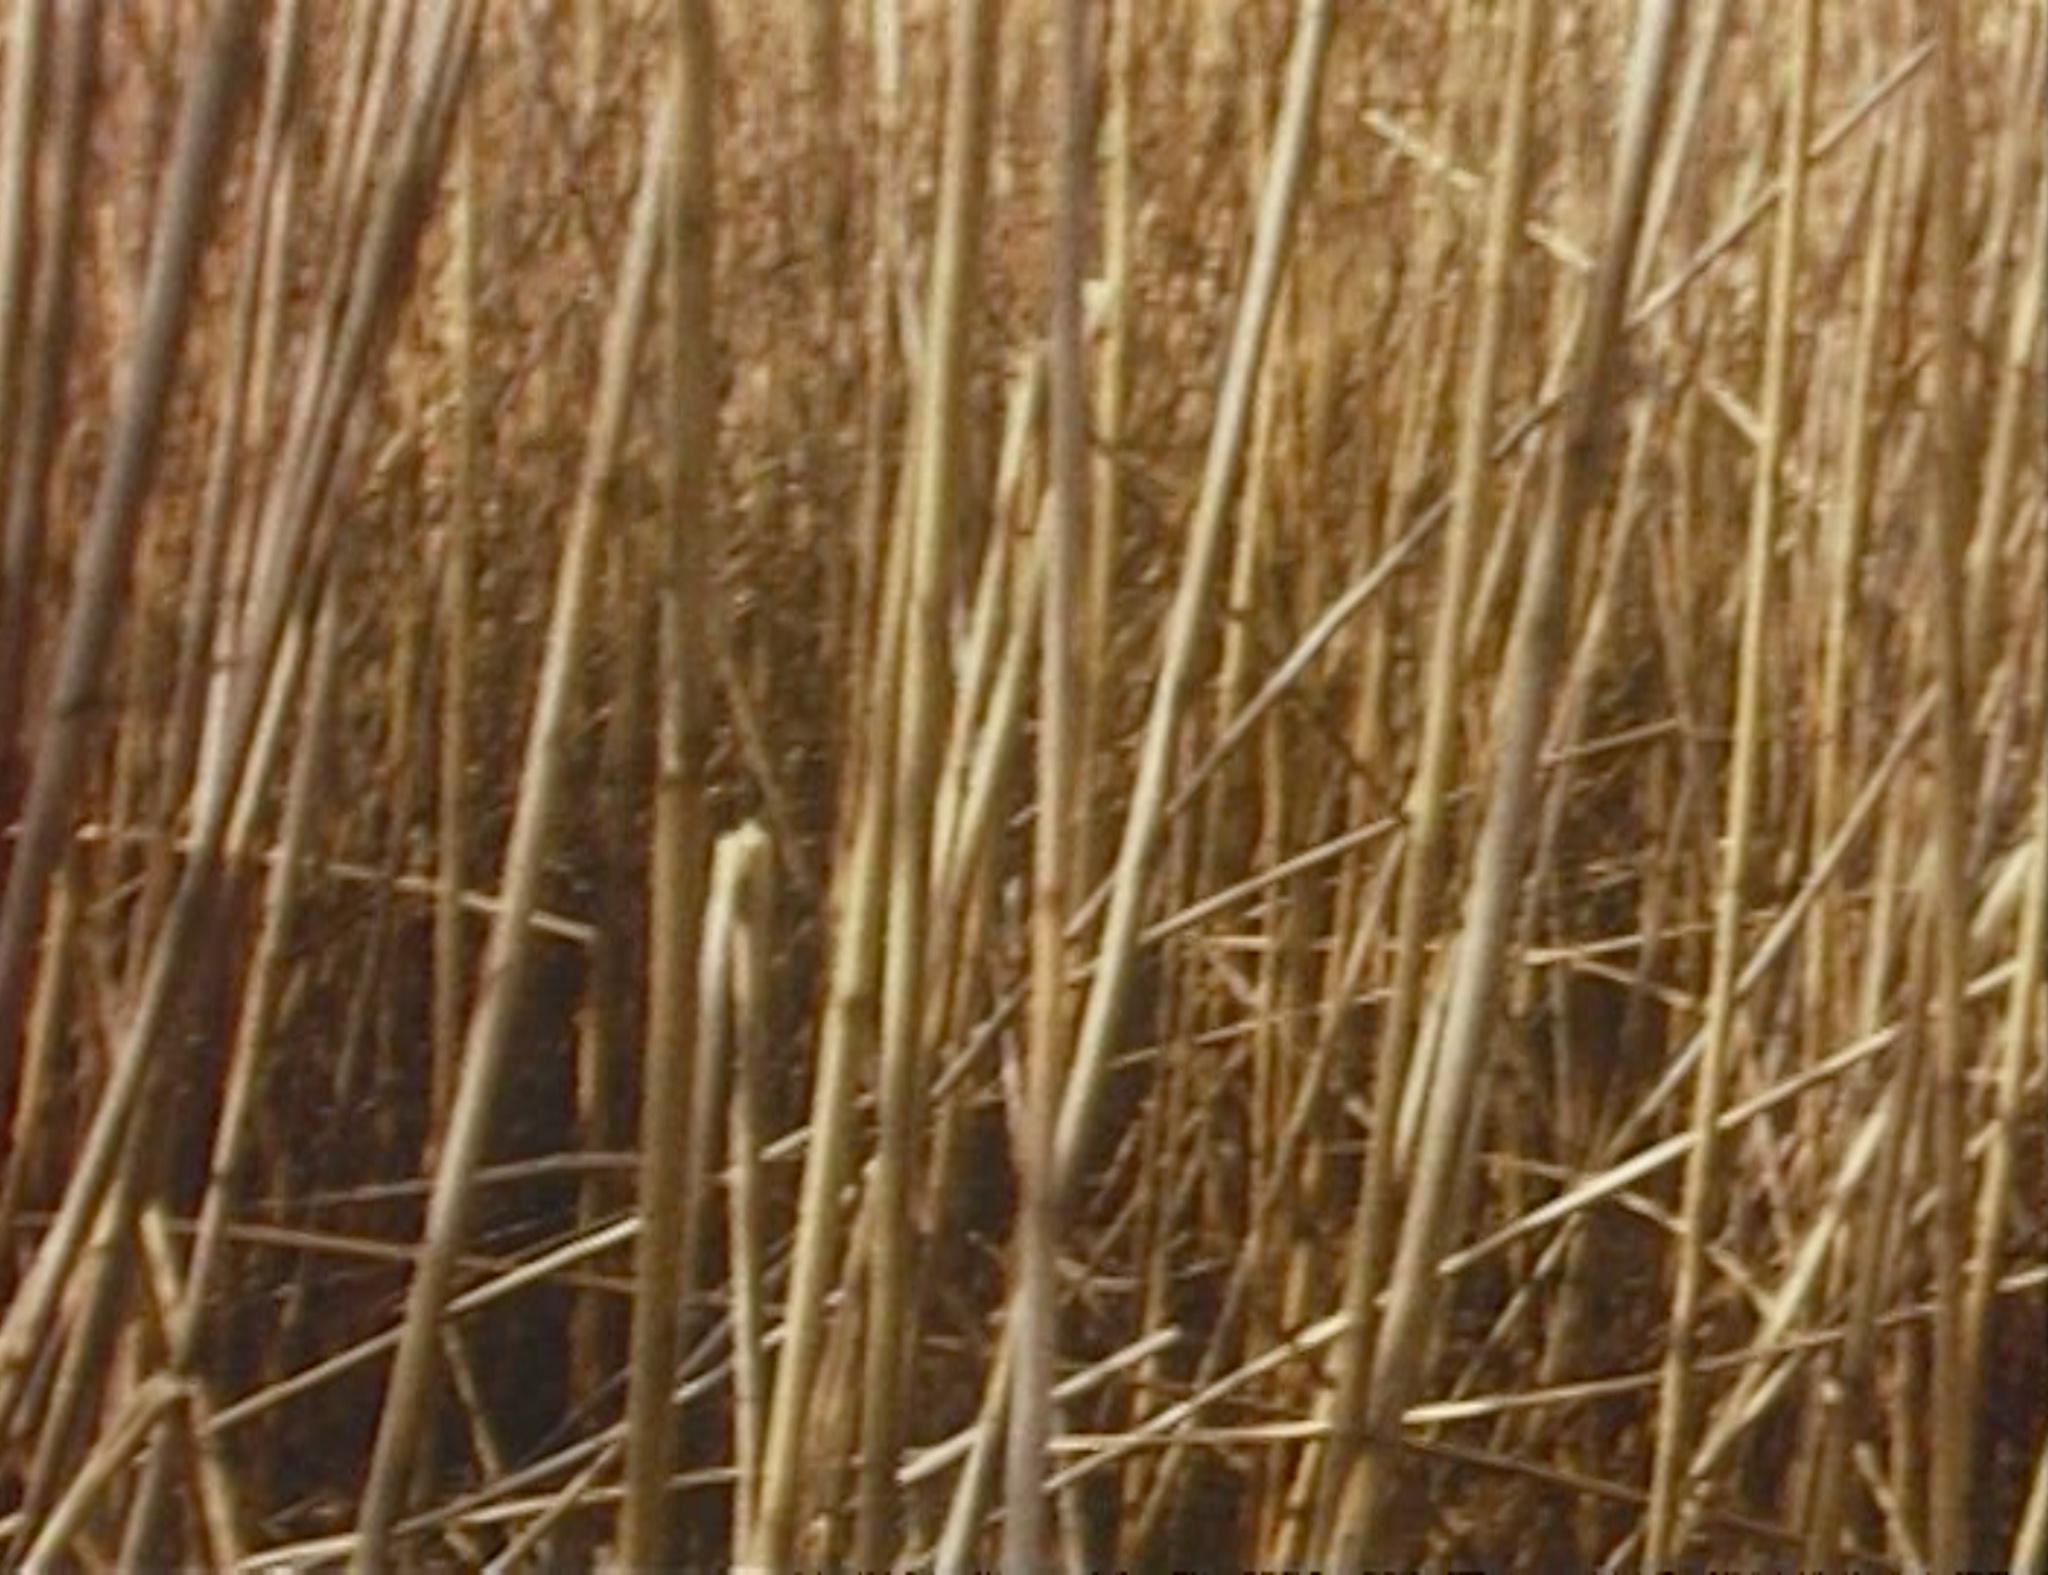 Chaotic image of many criss-crossing reeds.